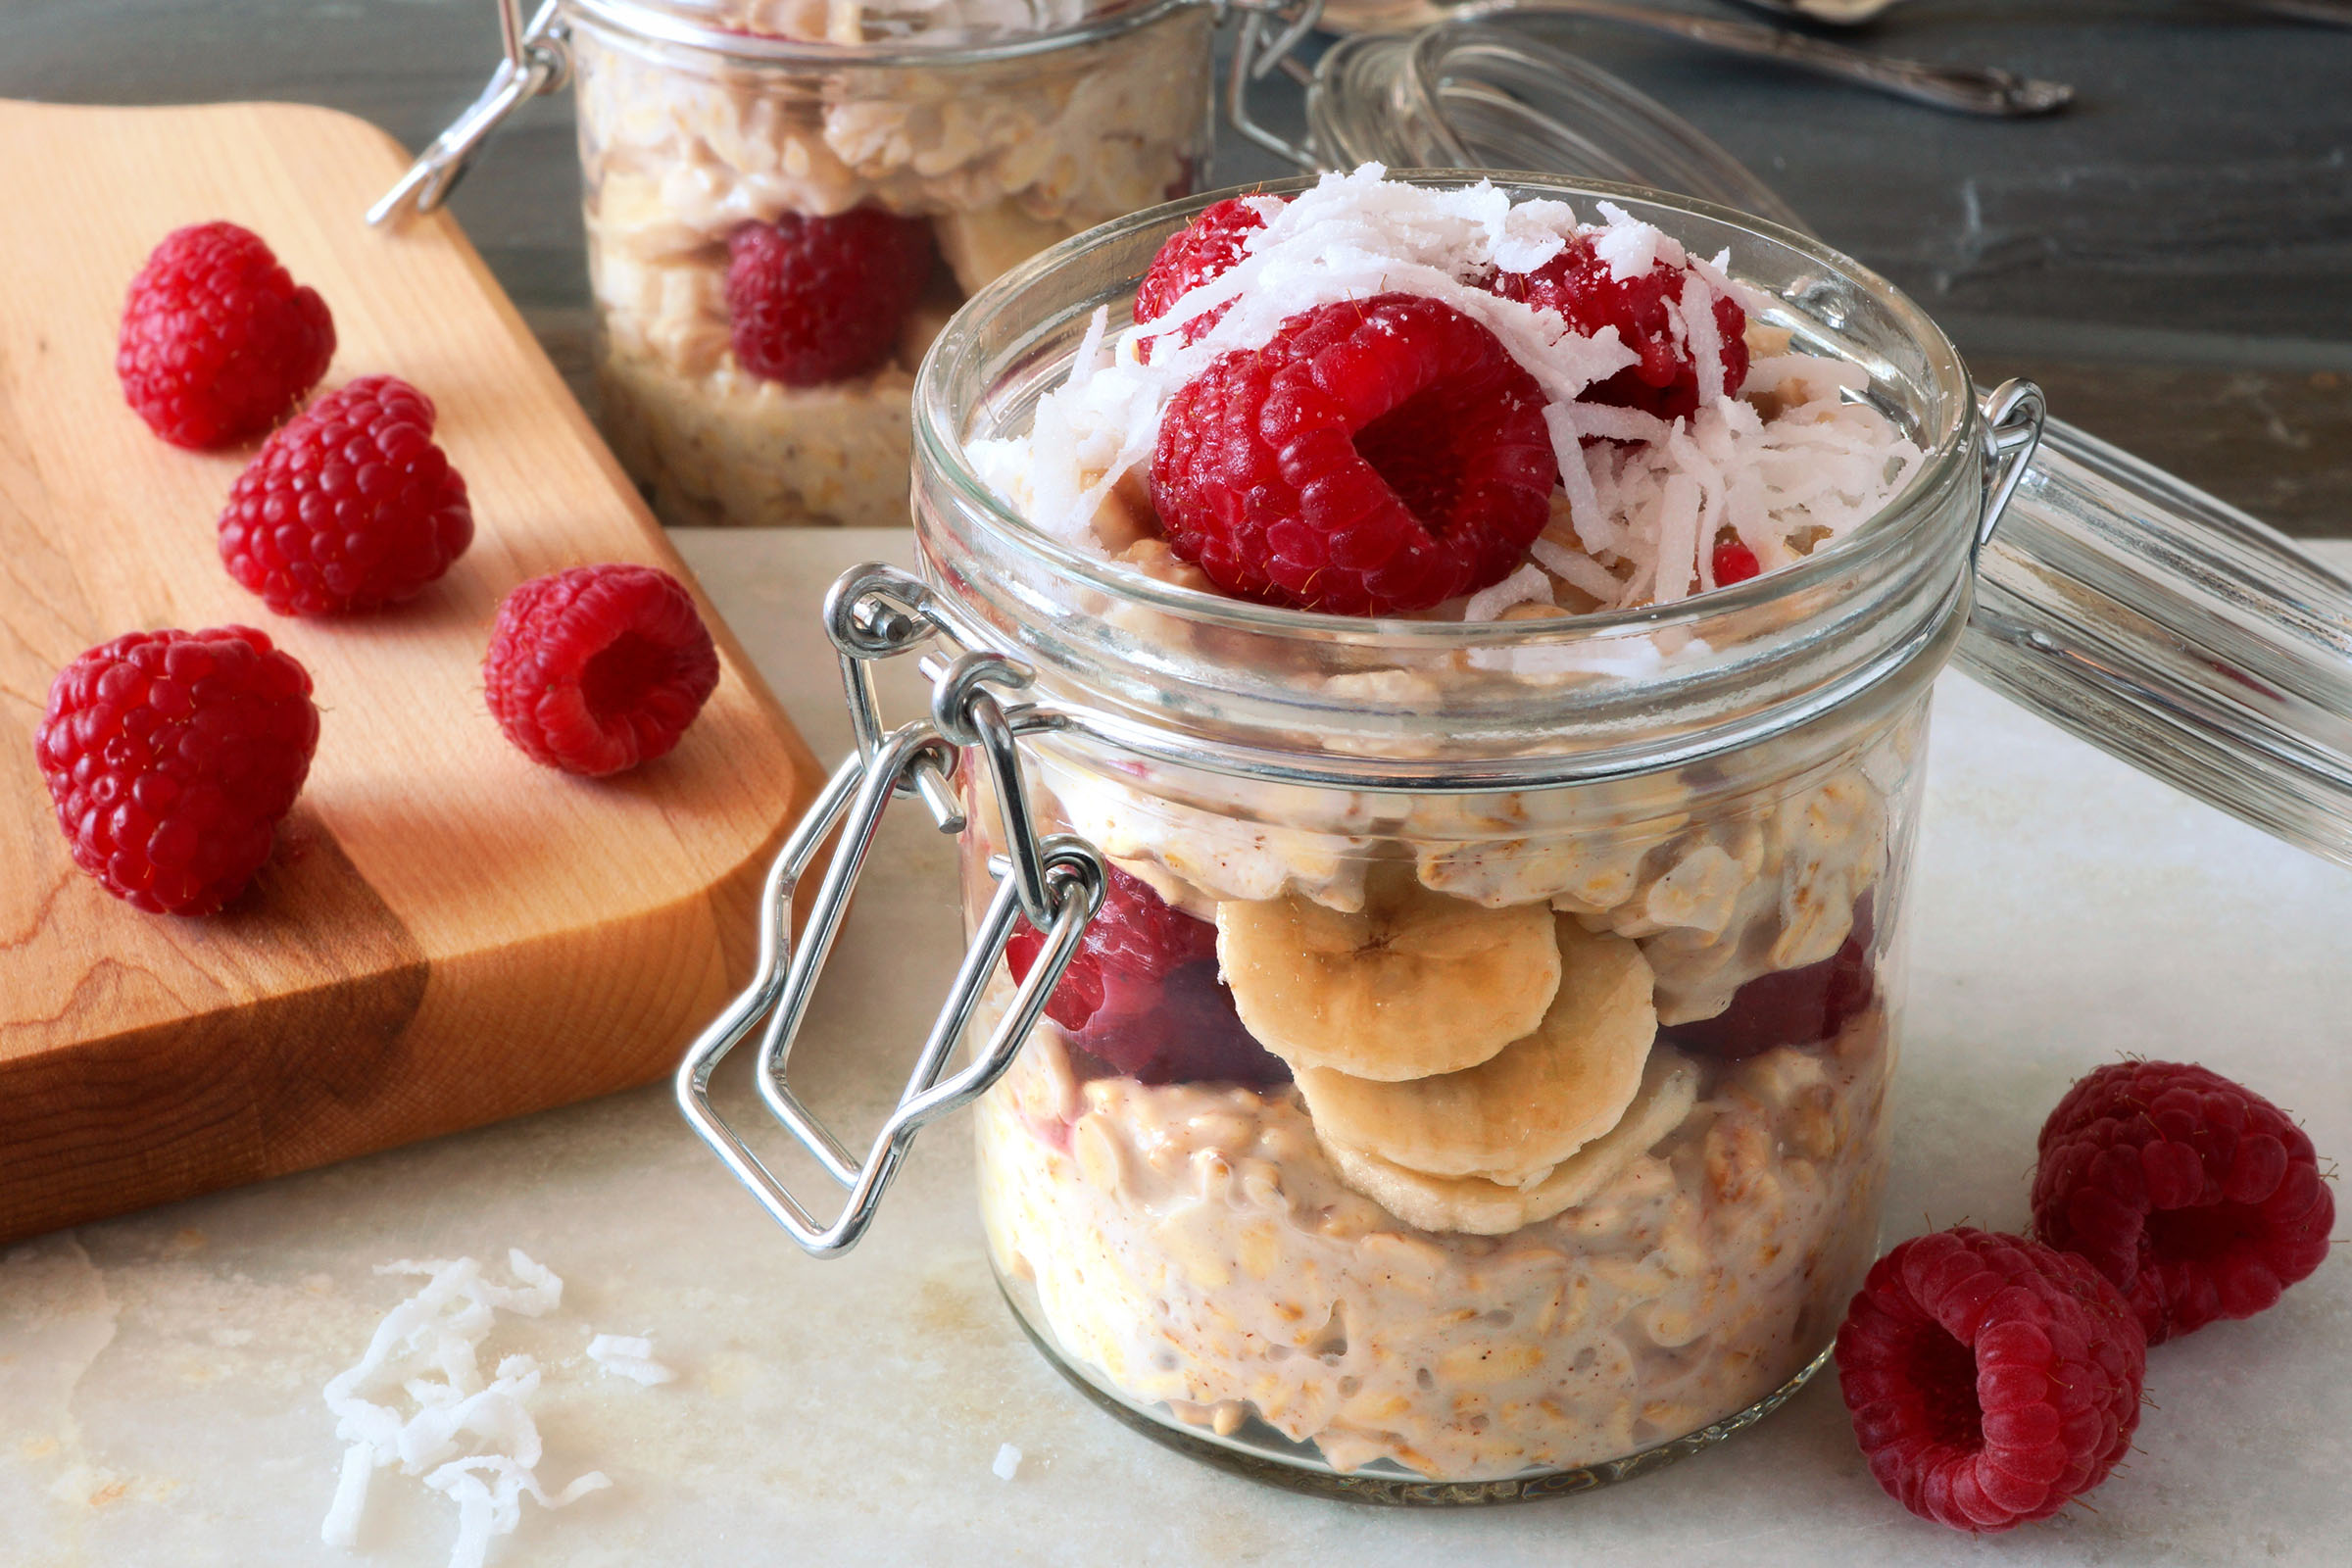 Featured image for “Overnight Oats”